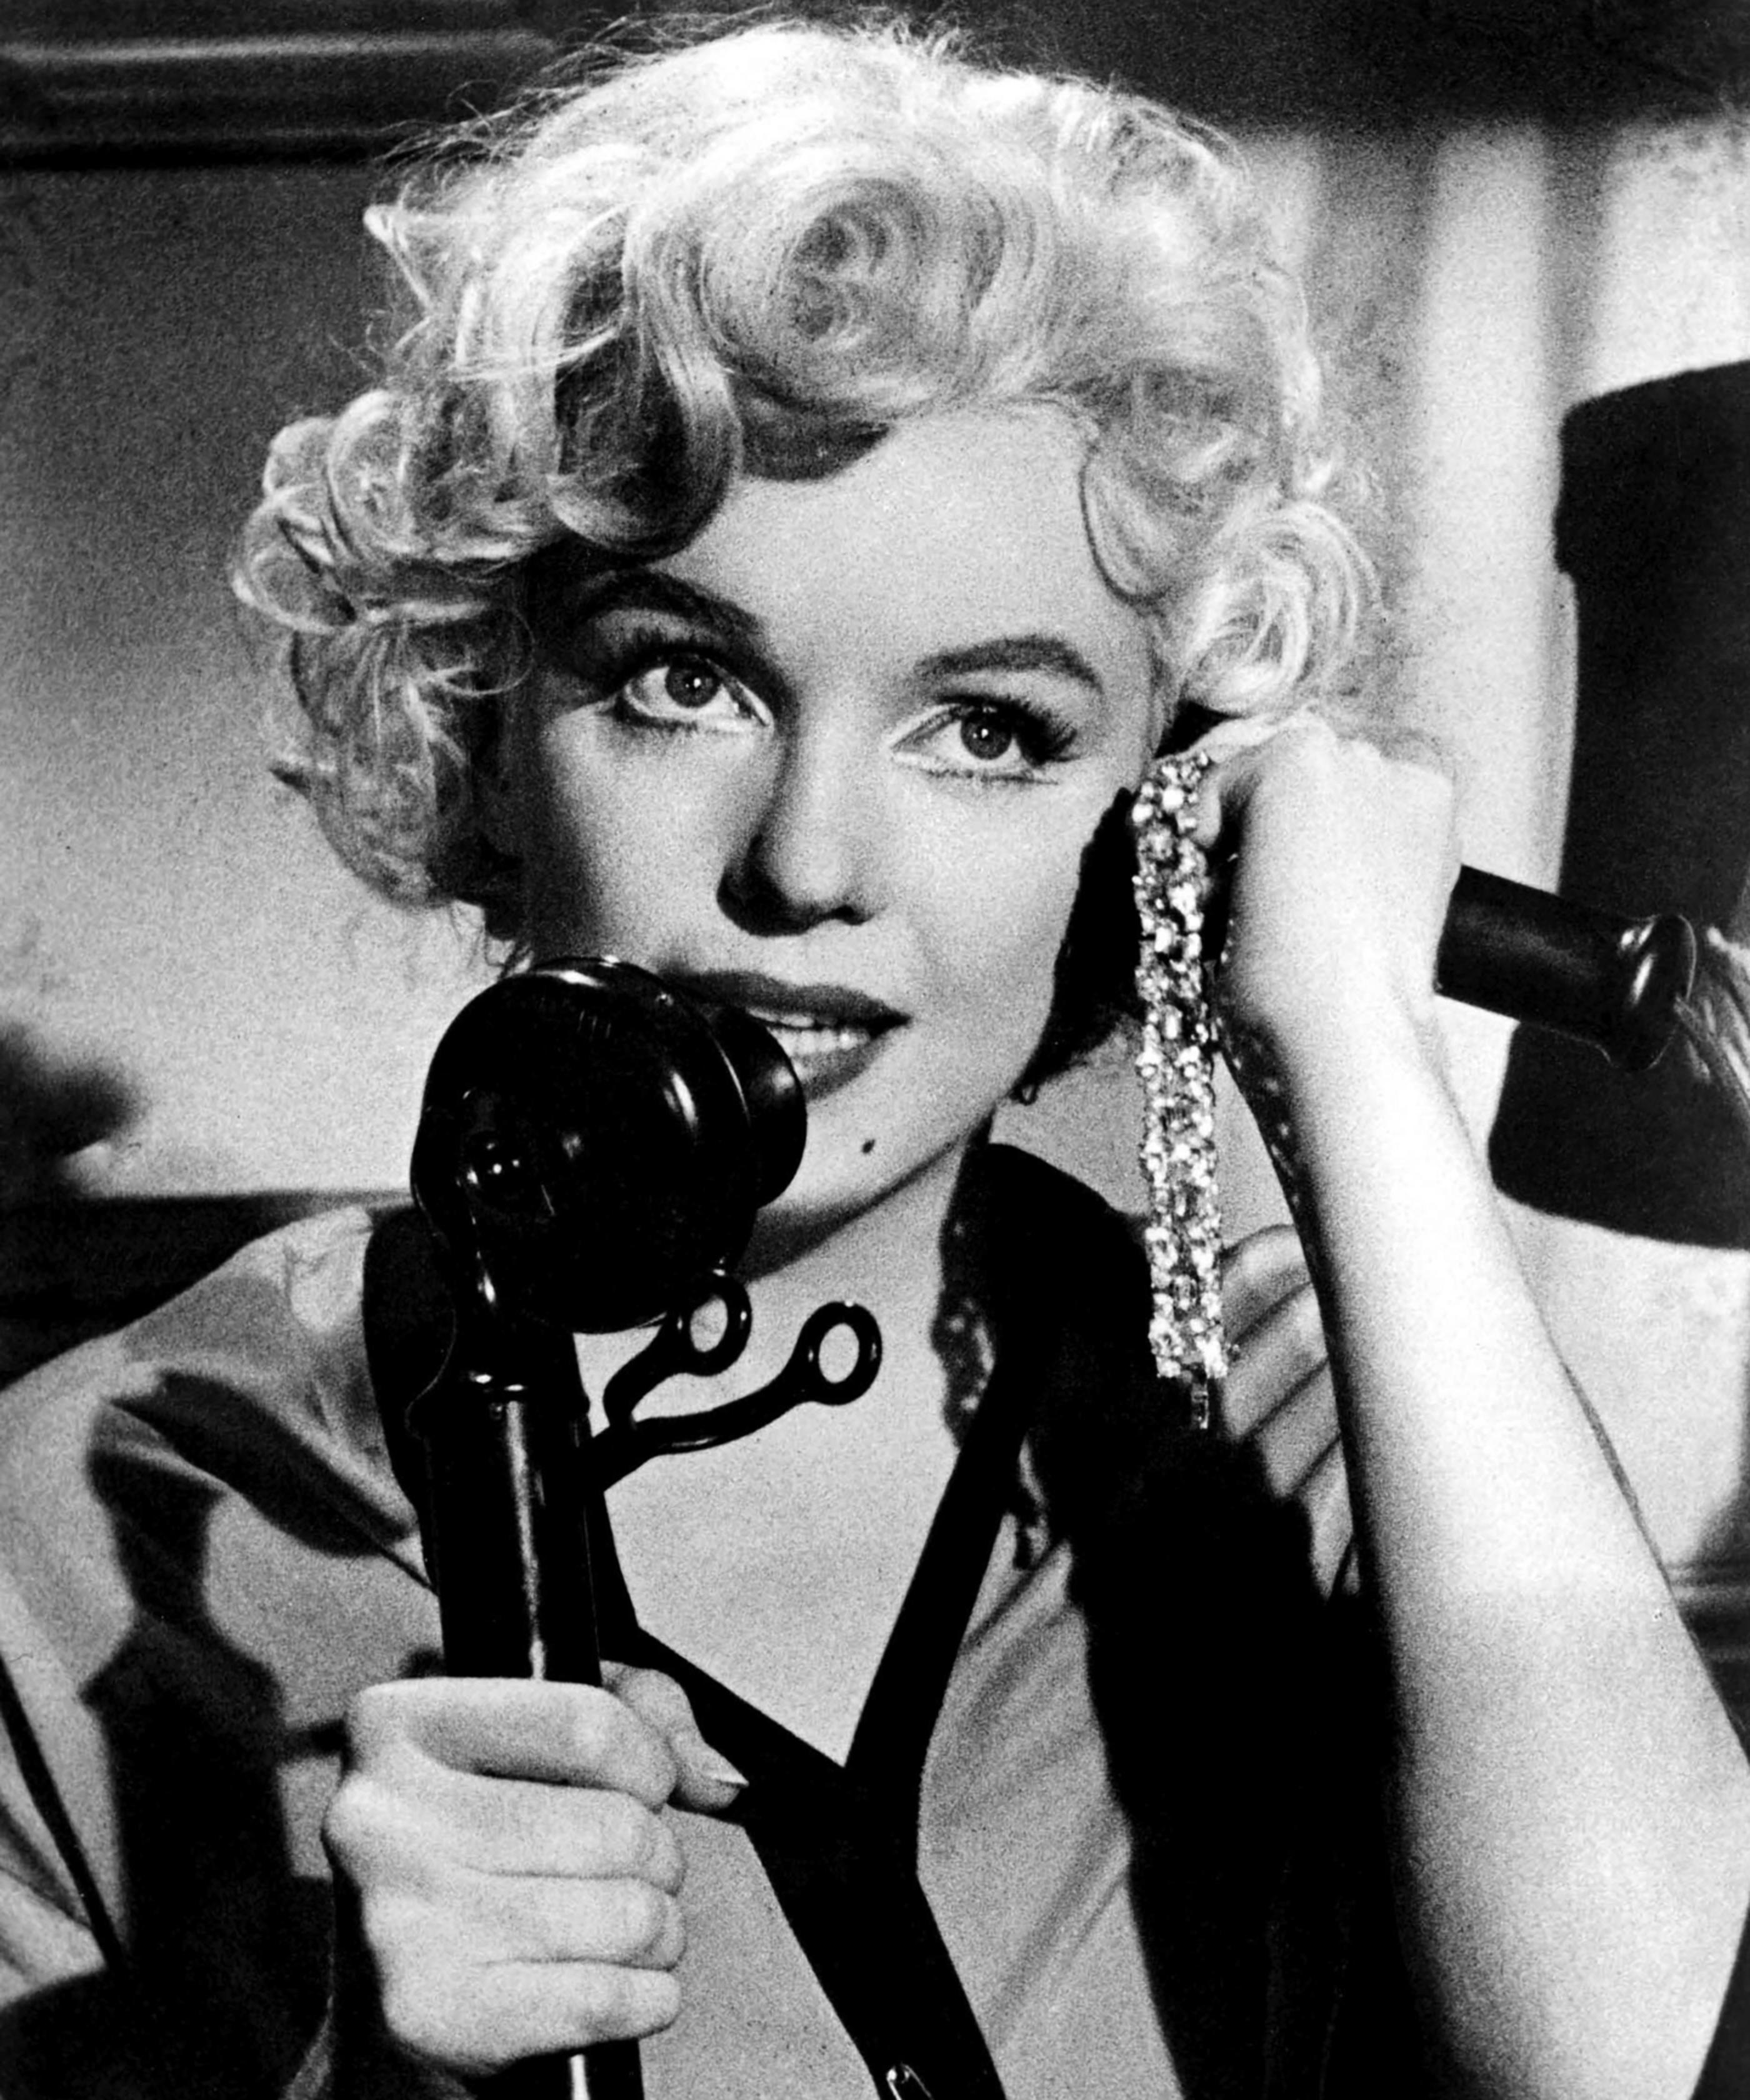 Unknown Black and White Photograph - Marilyn Monroe in Some Like It Hot